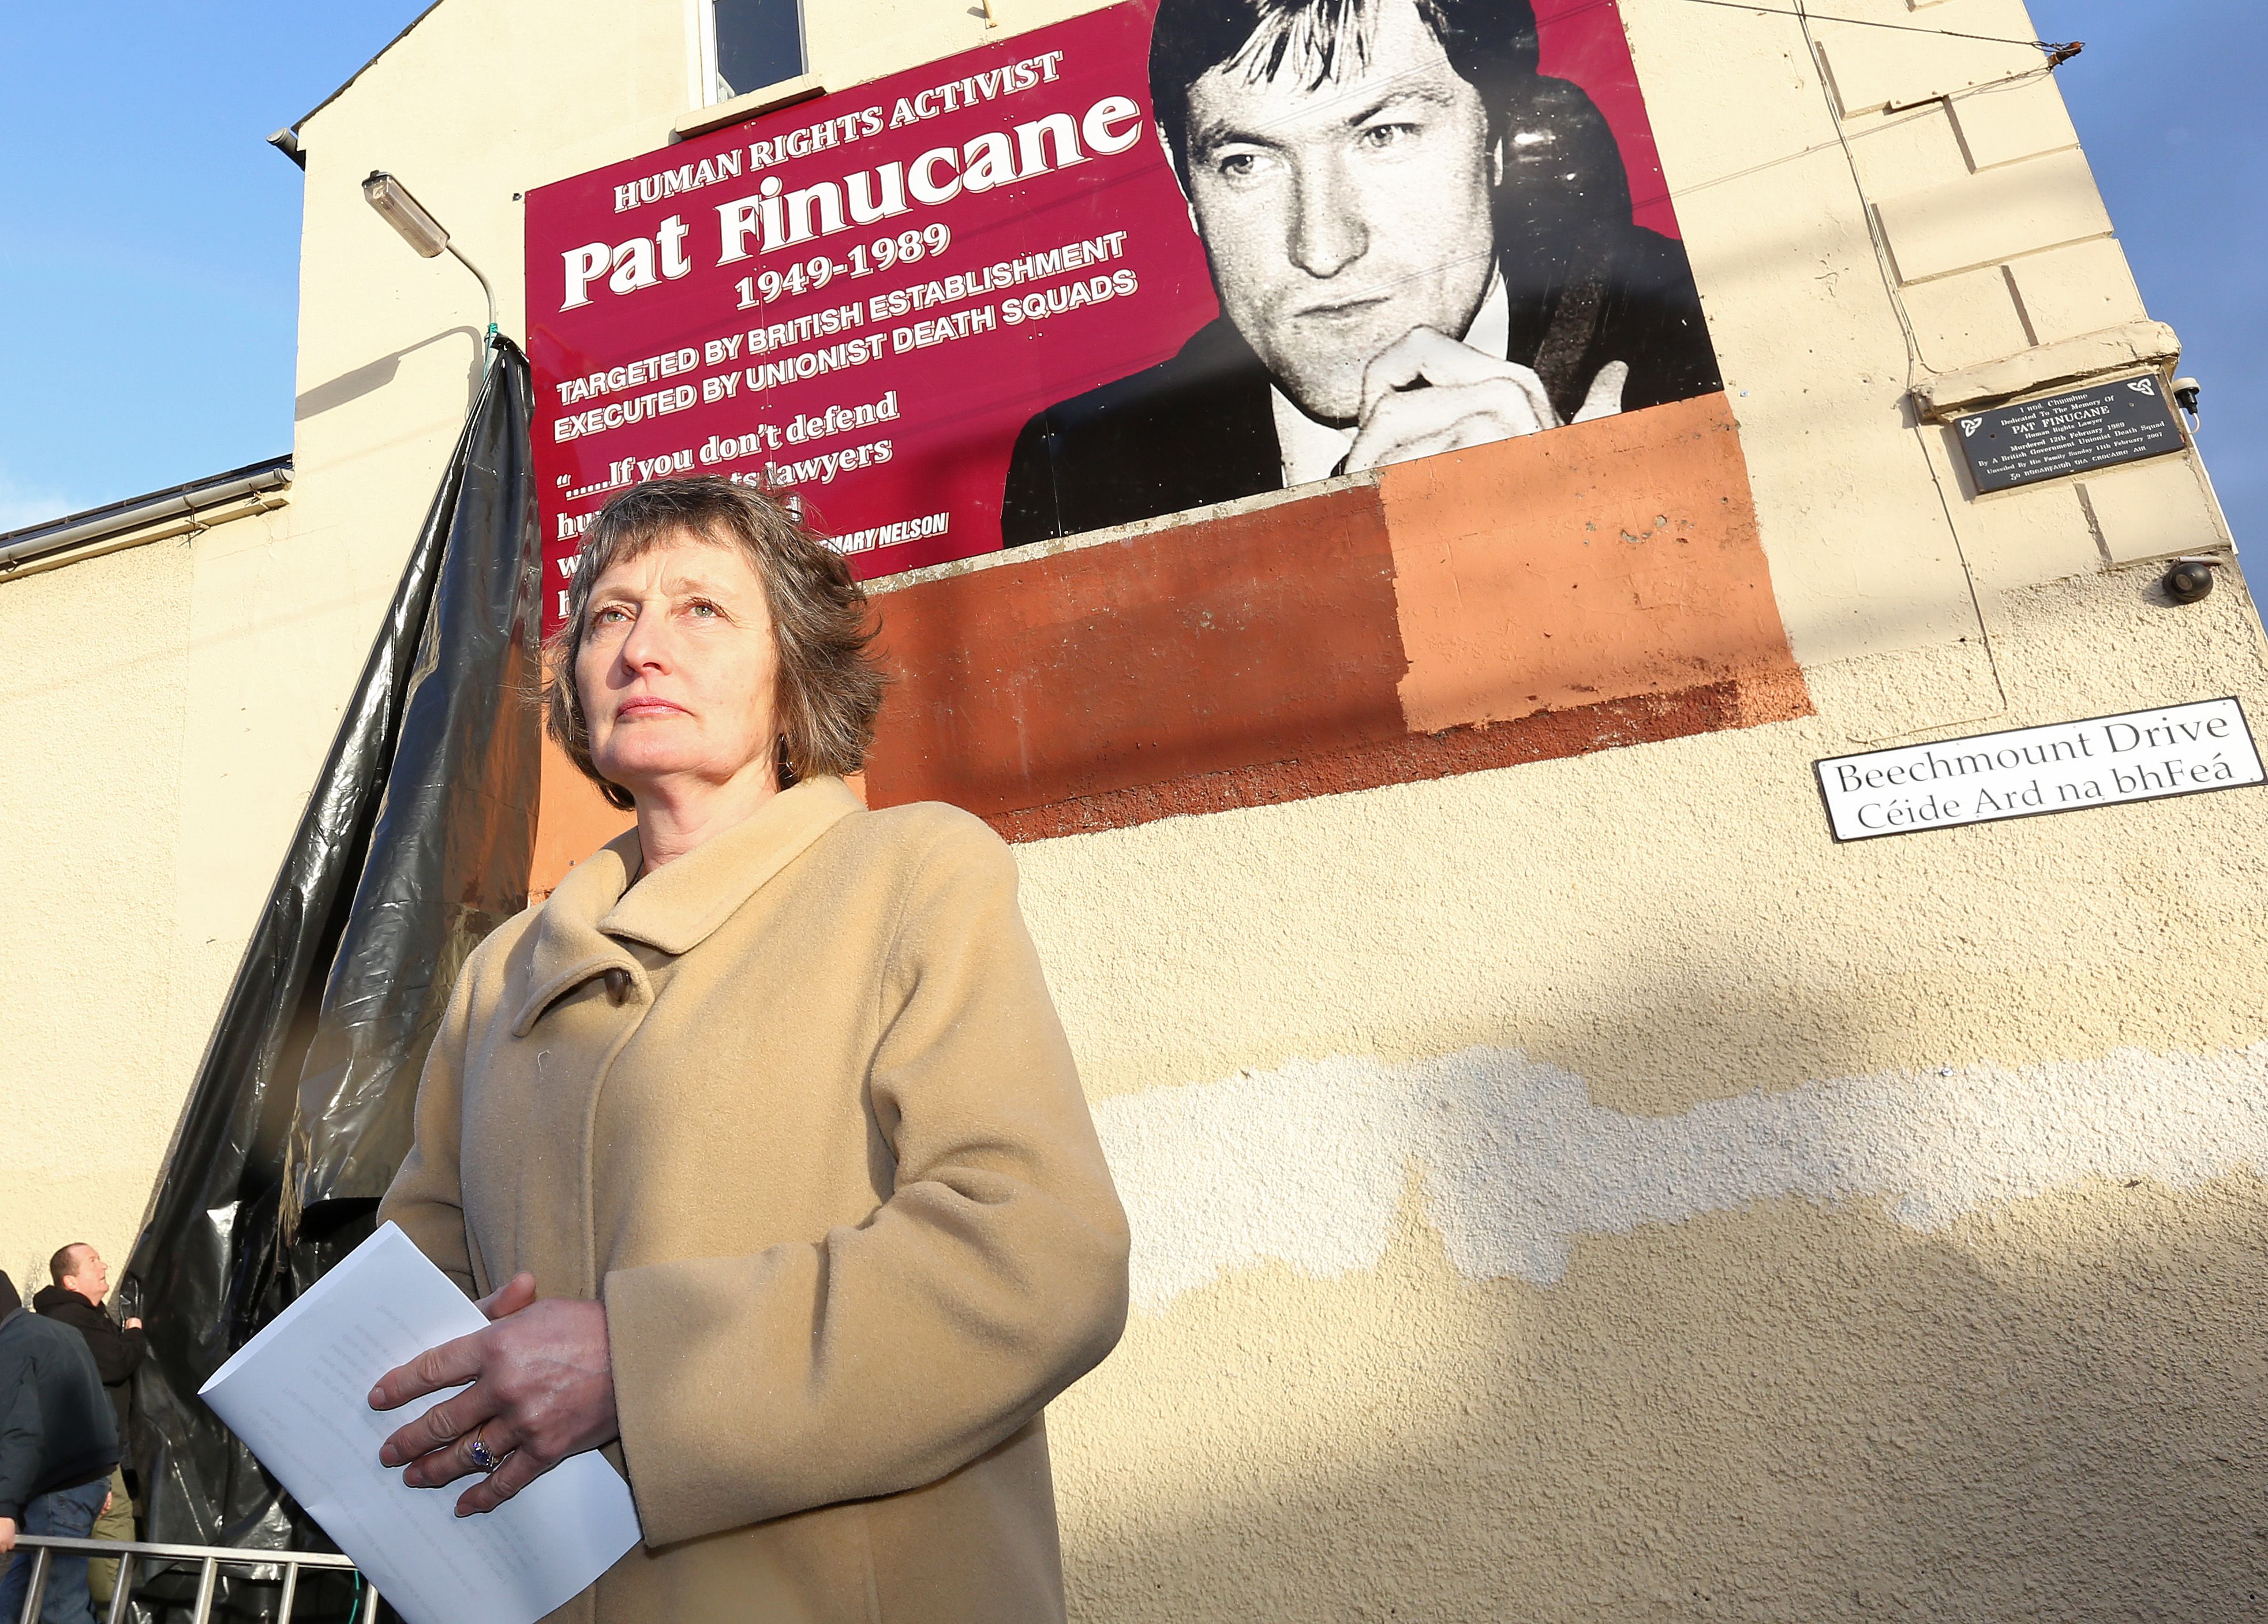 TRUTH SEARCH: Geraldine Finucane, widow of murdered human rights lawyer Pat, at an unveiling of a campaign mural in January 2008.